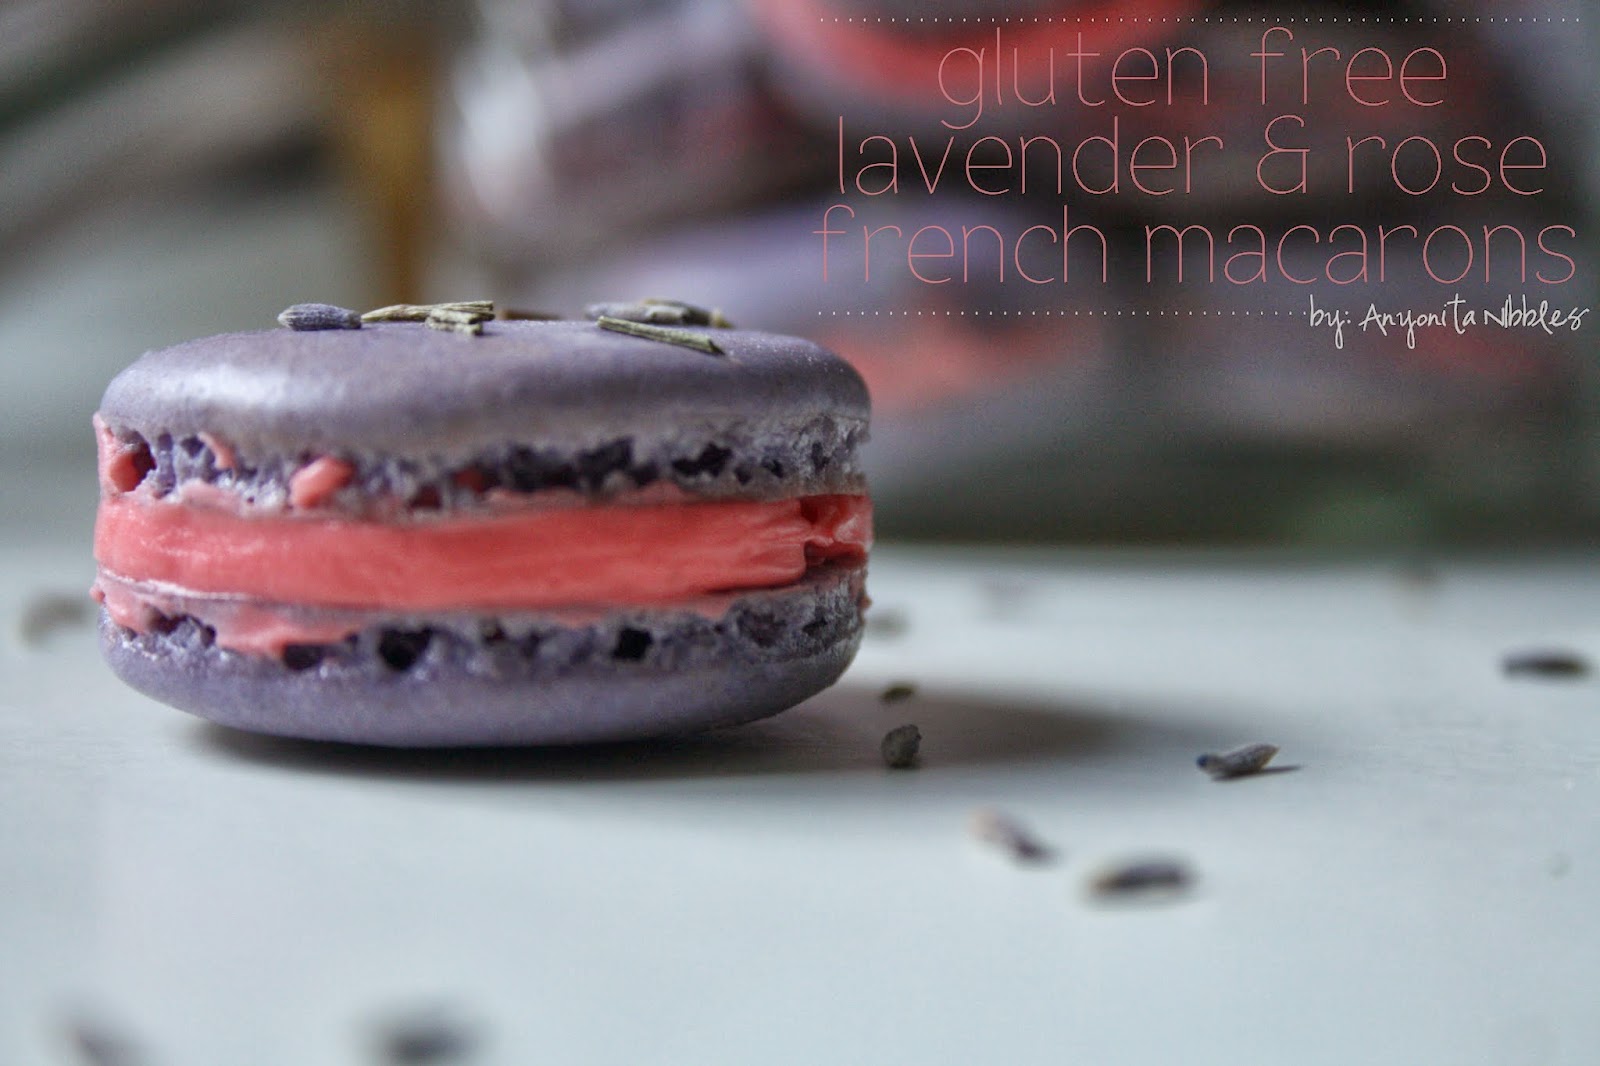 #glutenfree #lavender and #rose #French #macarons from @anyonita